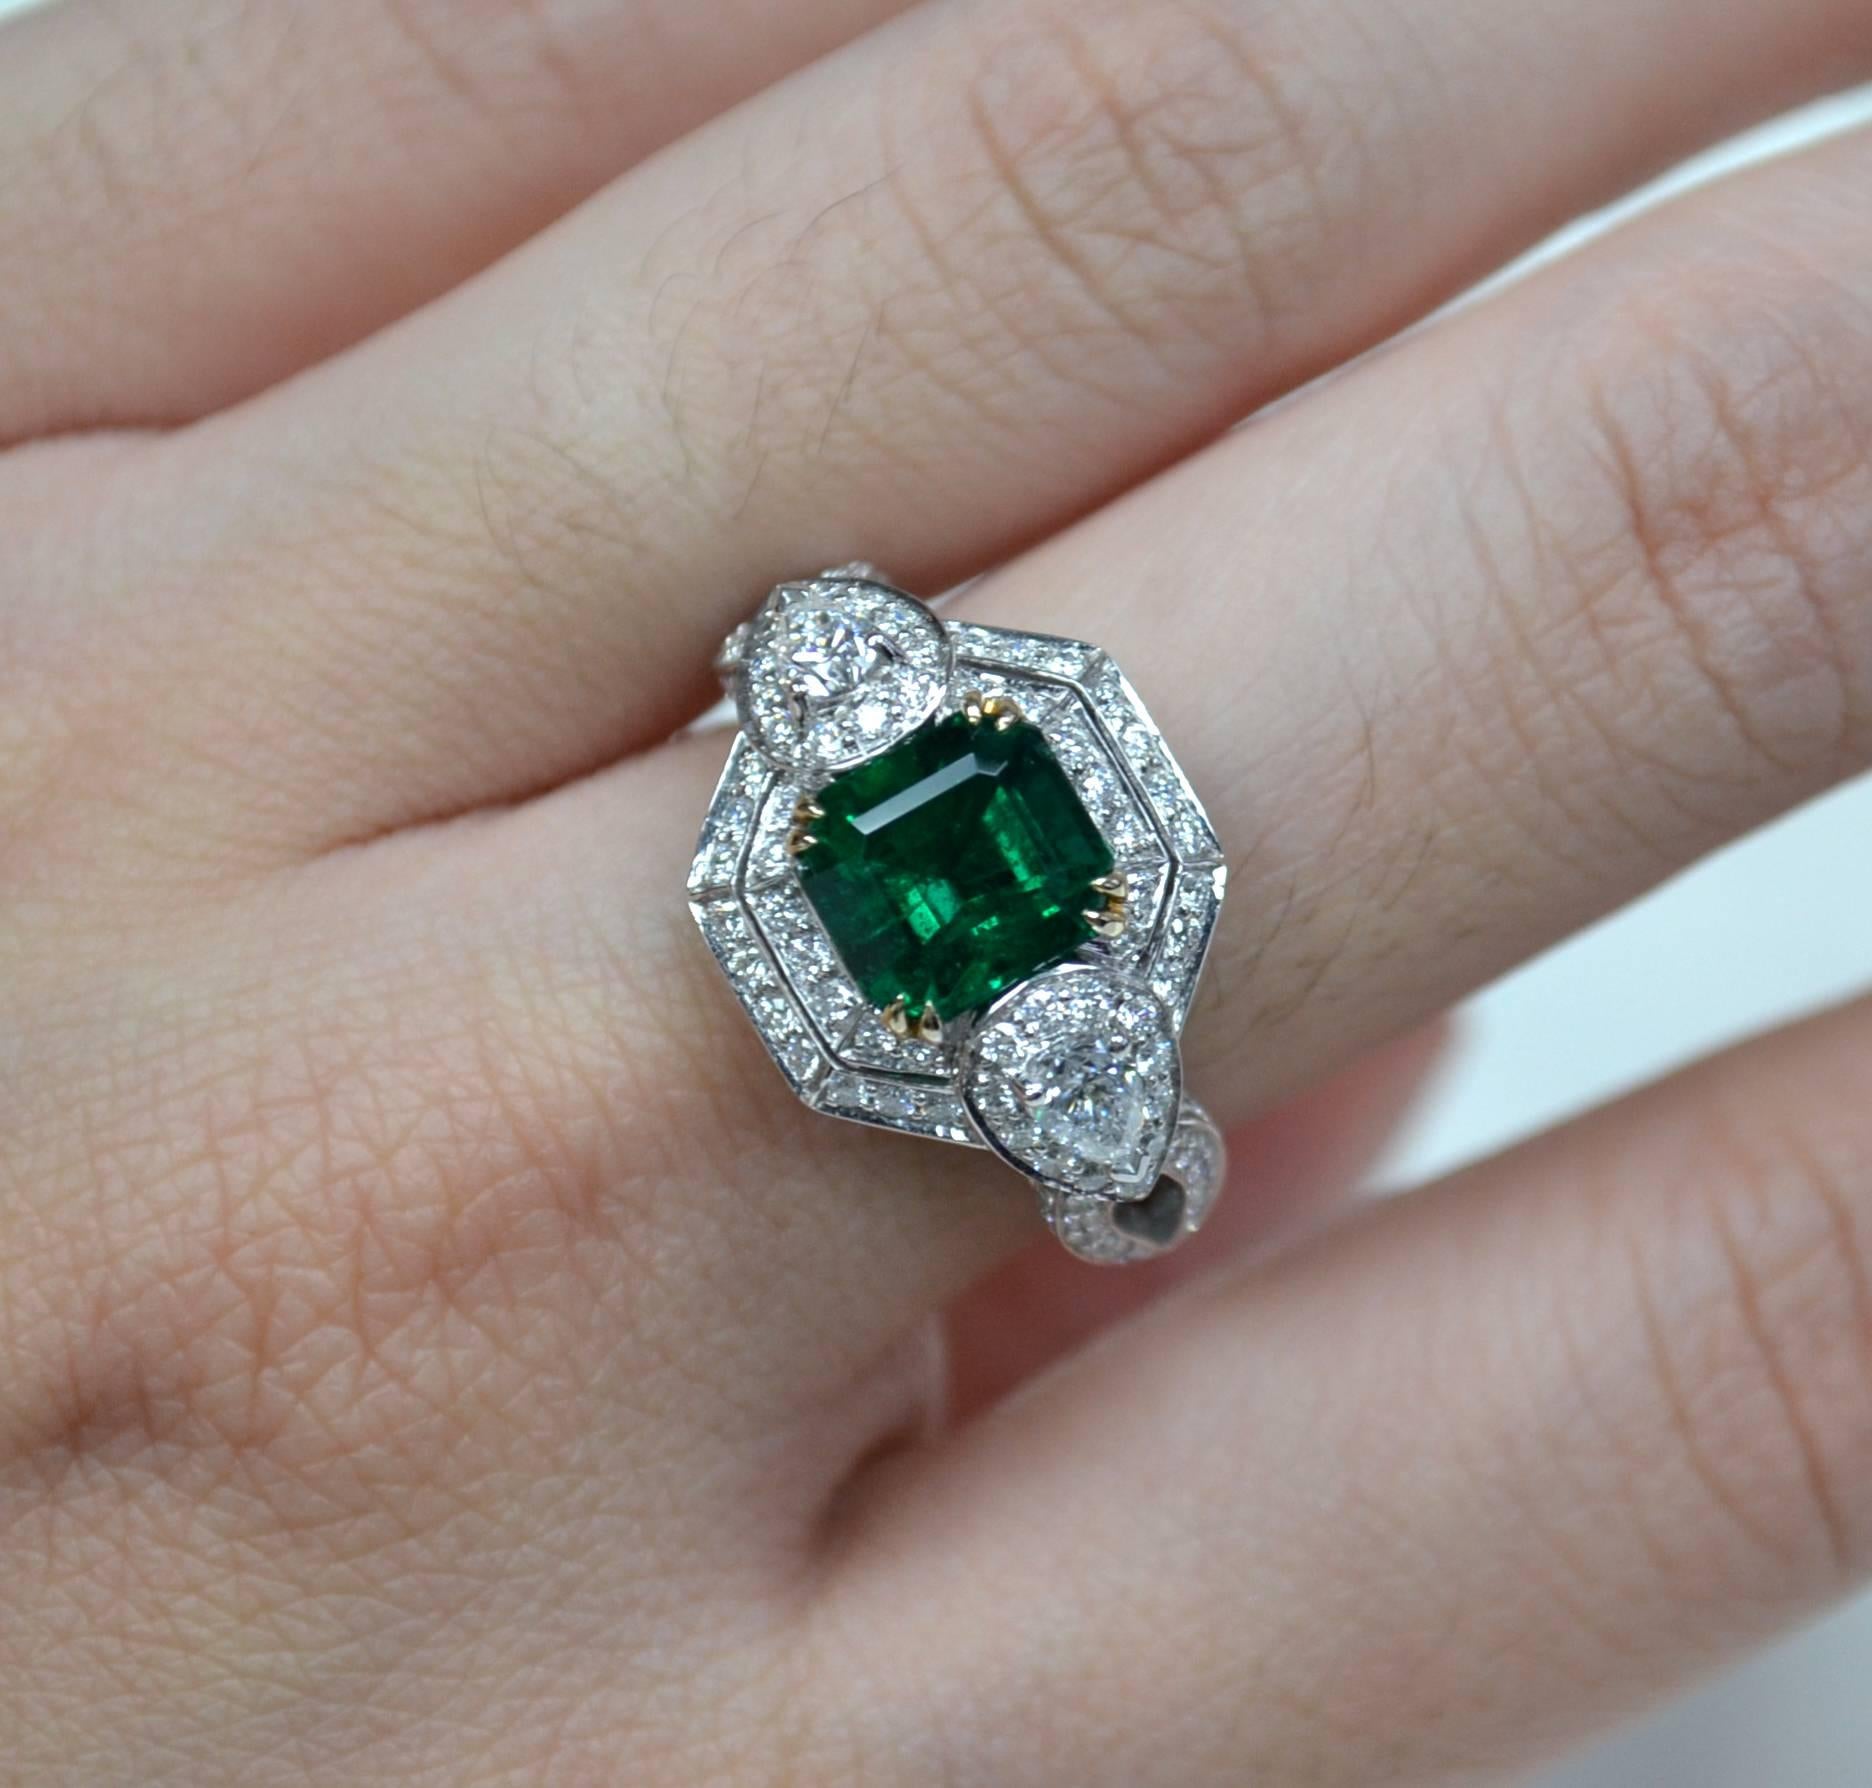 Ring in 18 karat two-tone gold set with an intense green emerald cut Zambian Emerald (2.00 carat), 2 pear-shaped Diamonds and round brilliant-cut Diamonds (1.22 carats).

Ring US Size 6.5
*Complimentary resizing service*